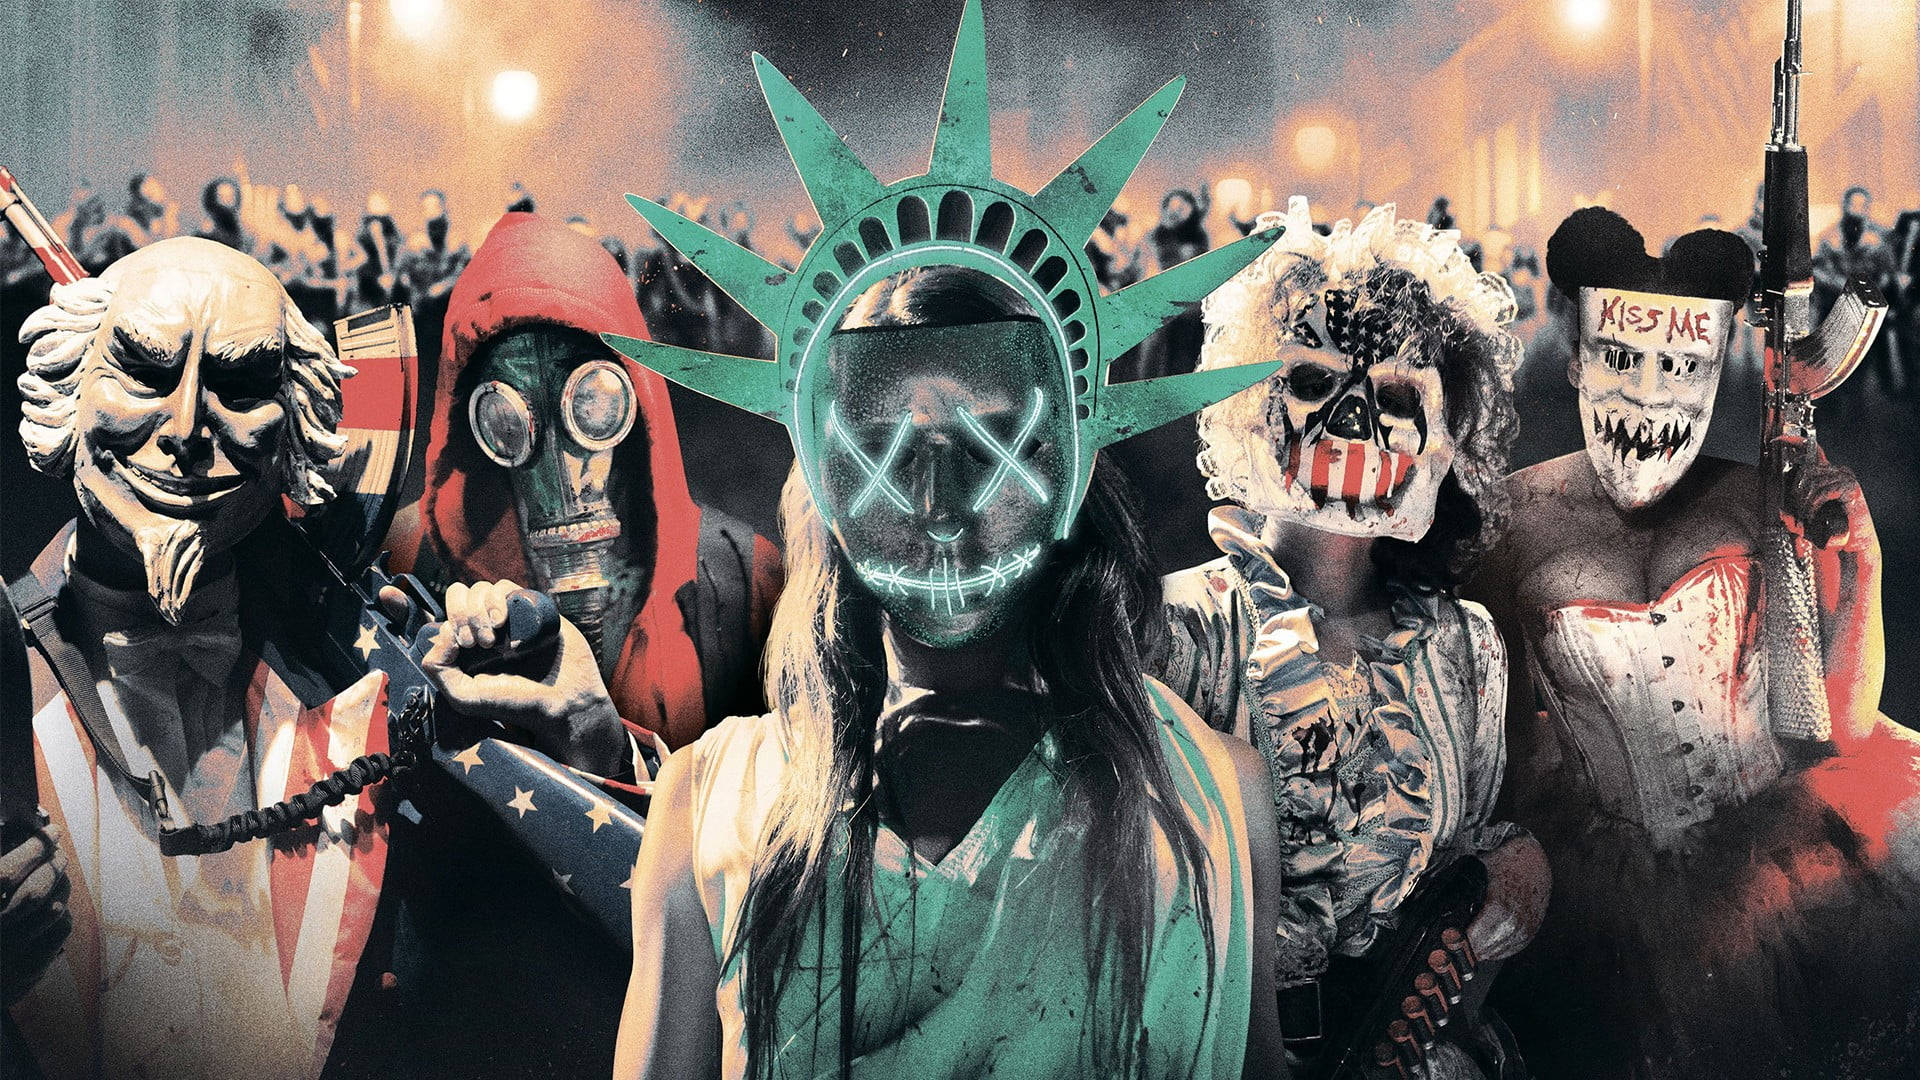 Caption: Unleash the Fear with Purge Election Year Mask Wallpaper